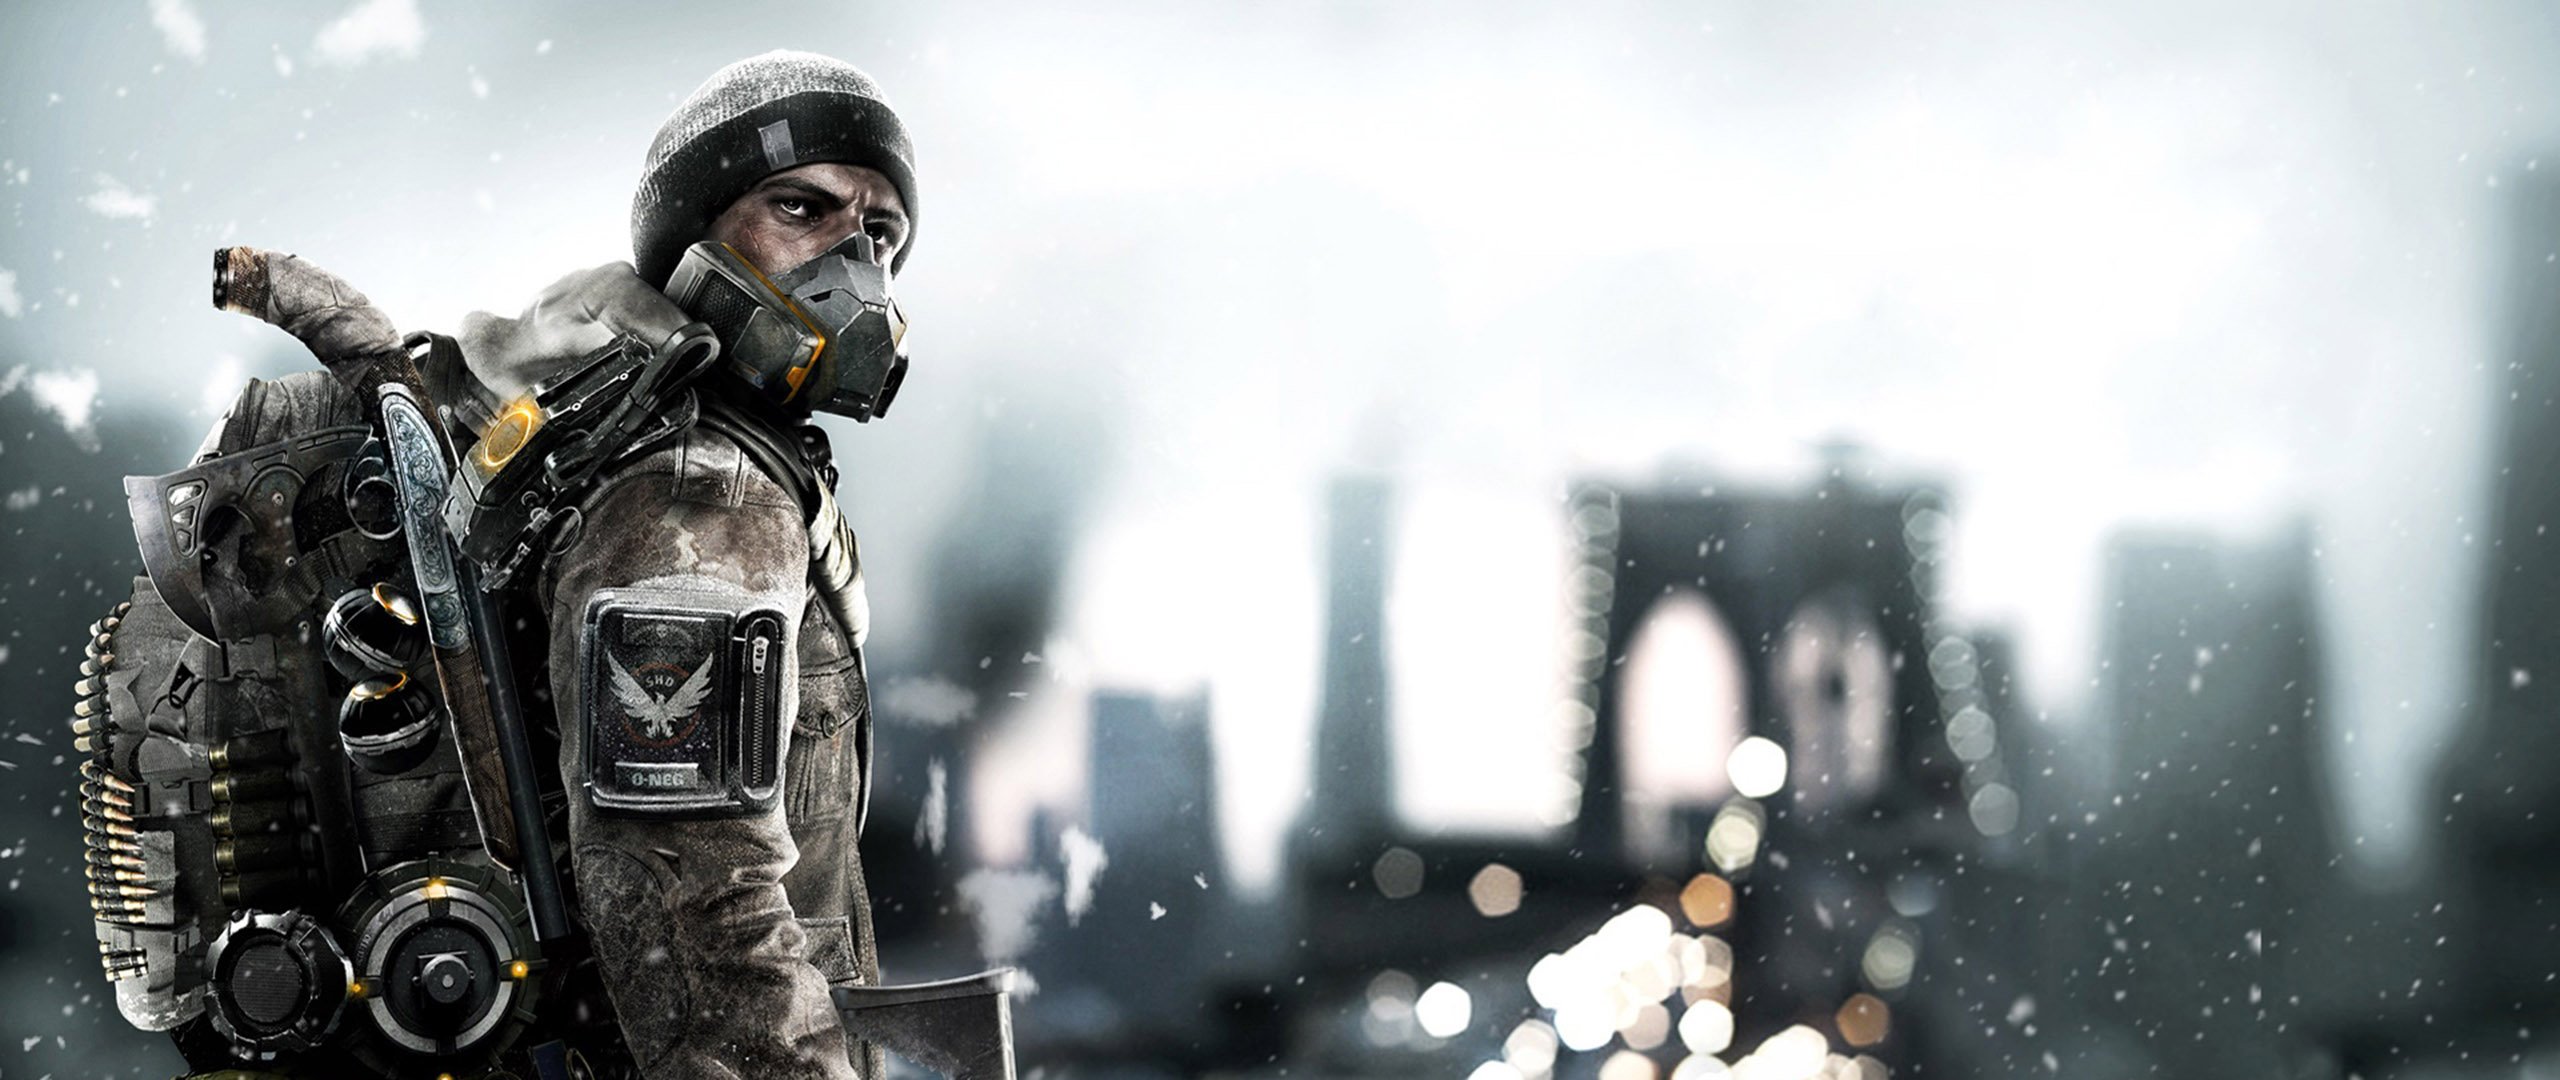 tom, Clancys, Division, Tactical, Shooter, Military, Warrior, Soldier, Clancy, Sci fi Wallpaper